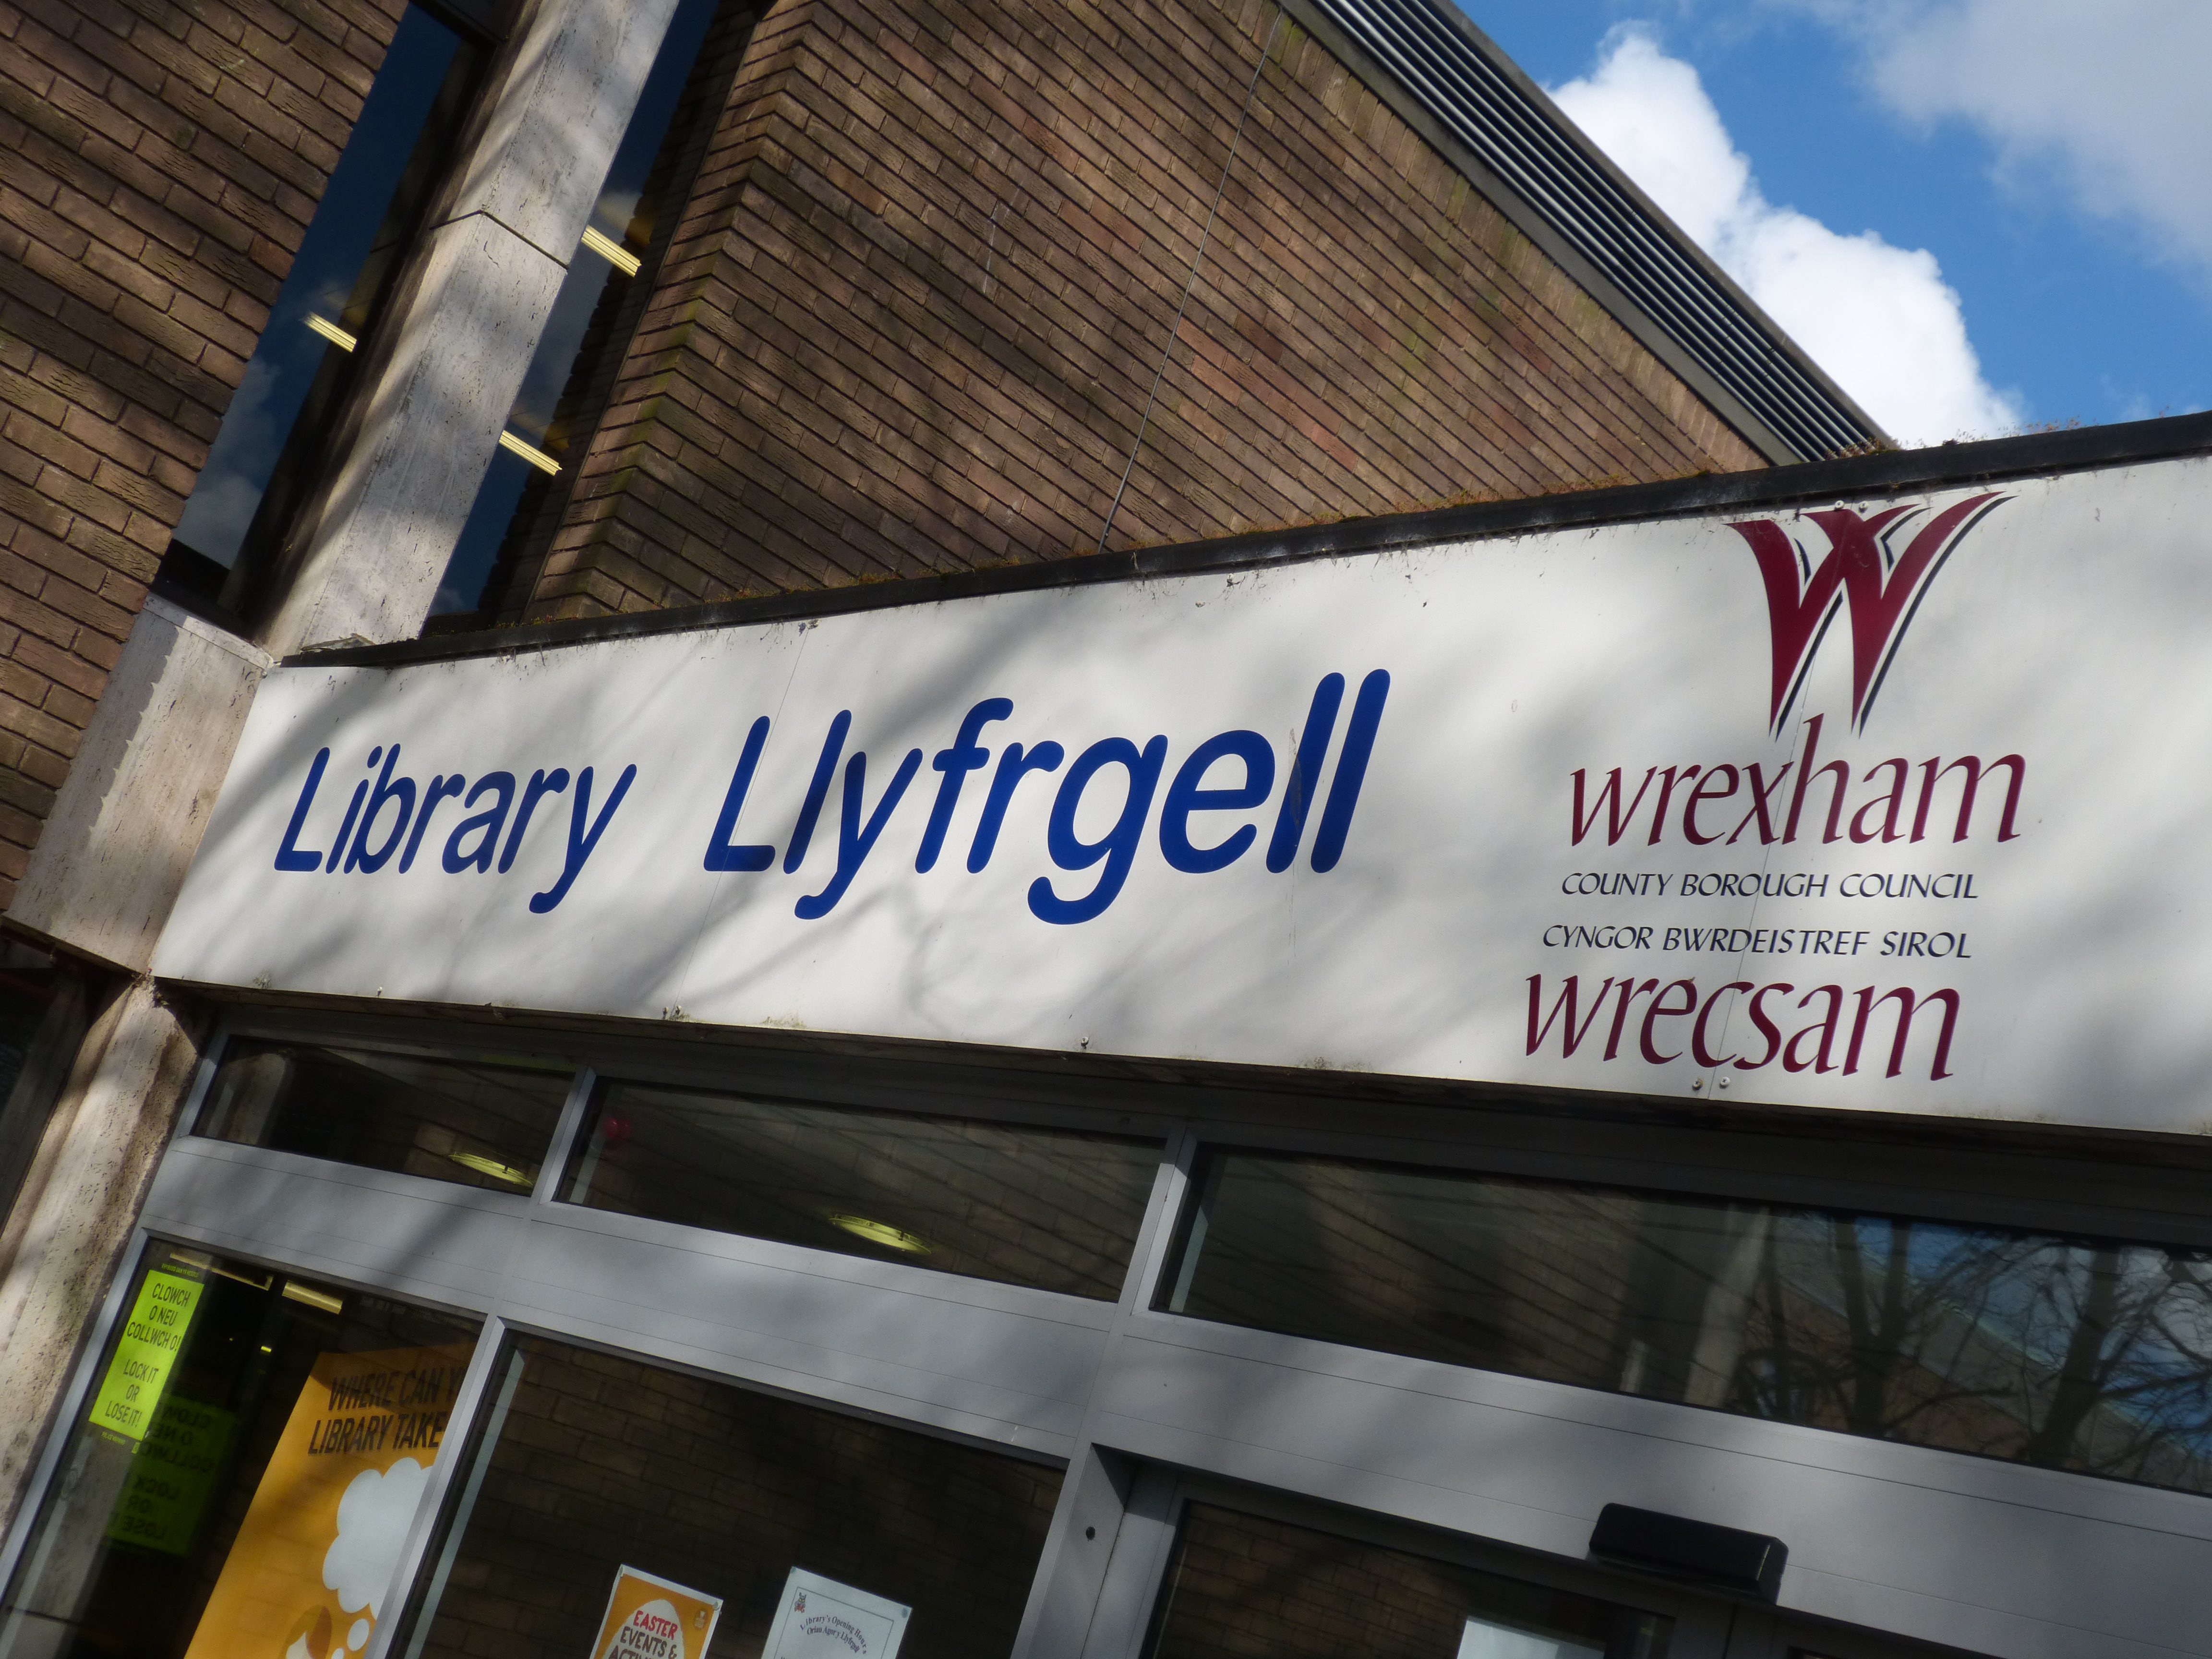 Get a taste of crime writers, lawyers and coppers this Libraries Week